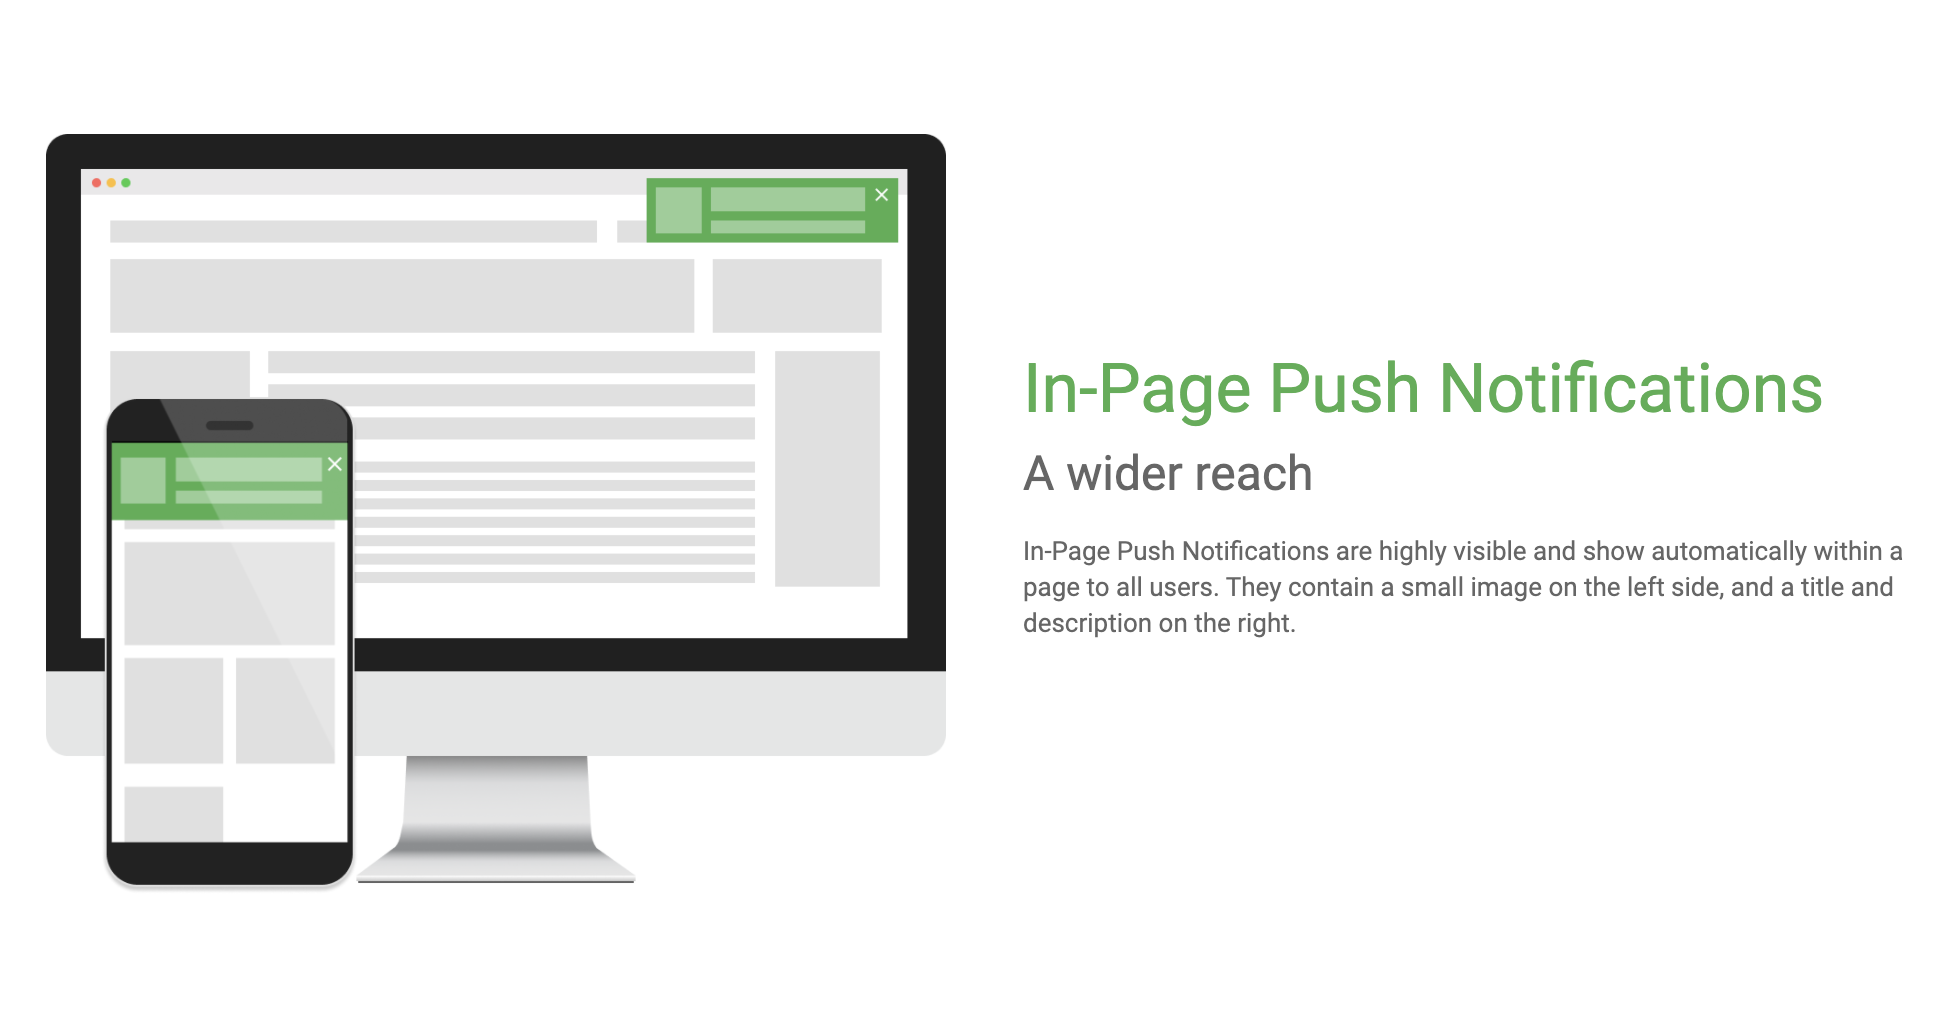 In-Page Push Notifications